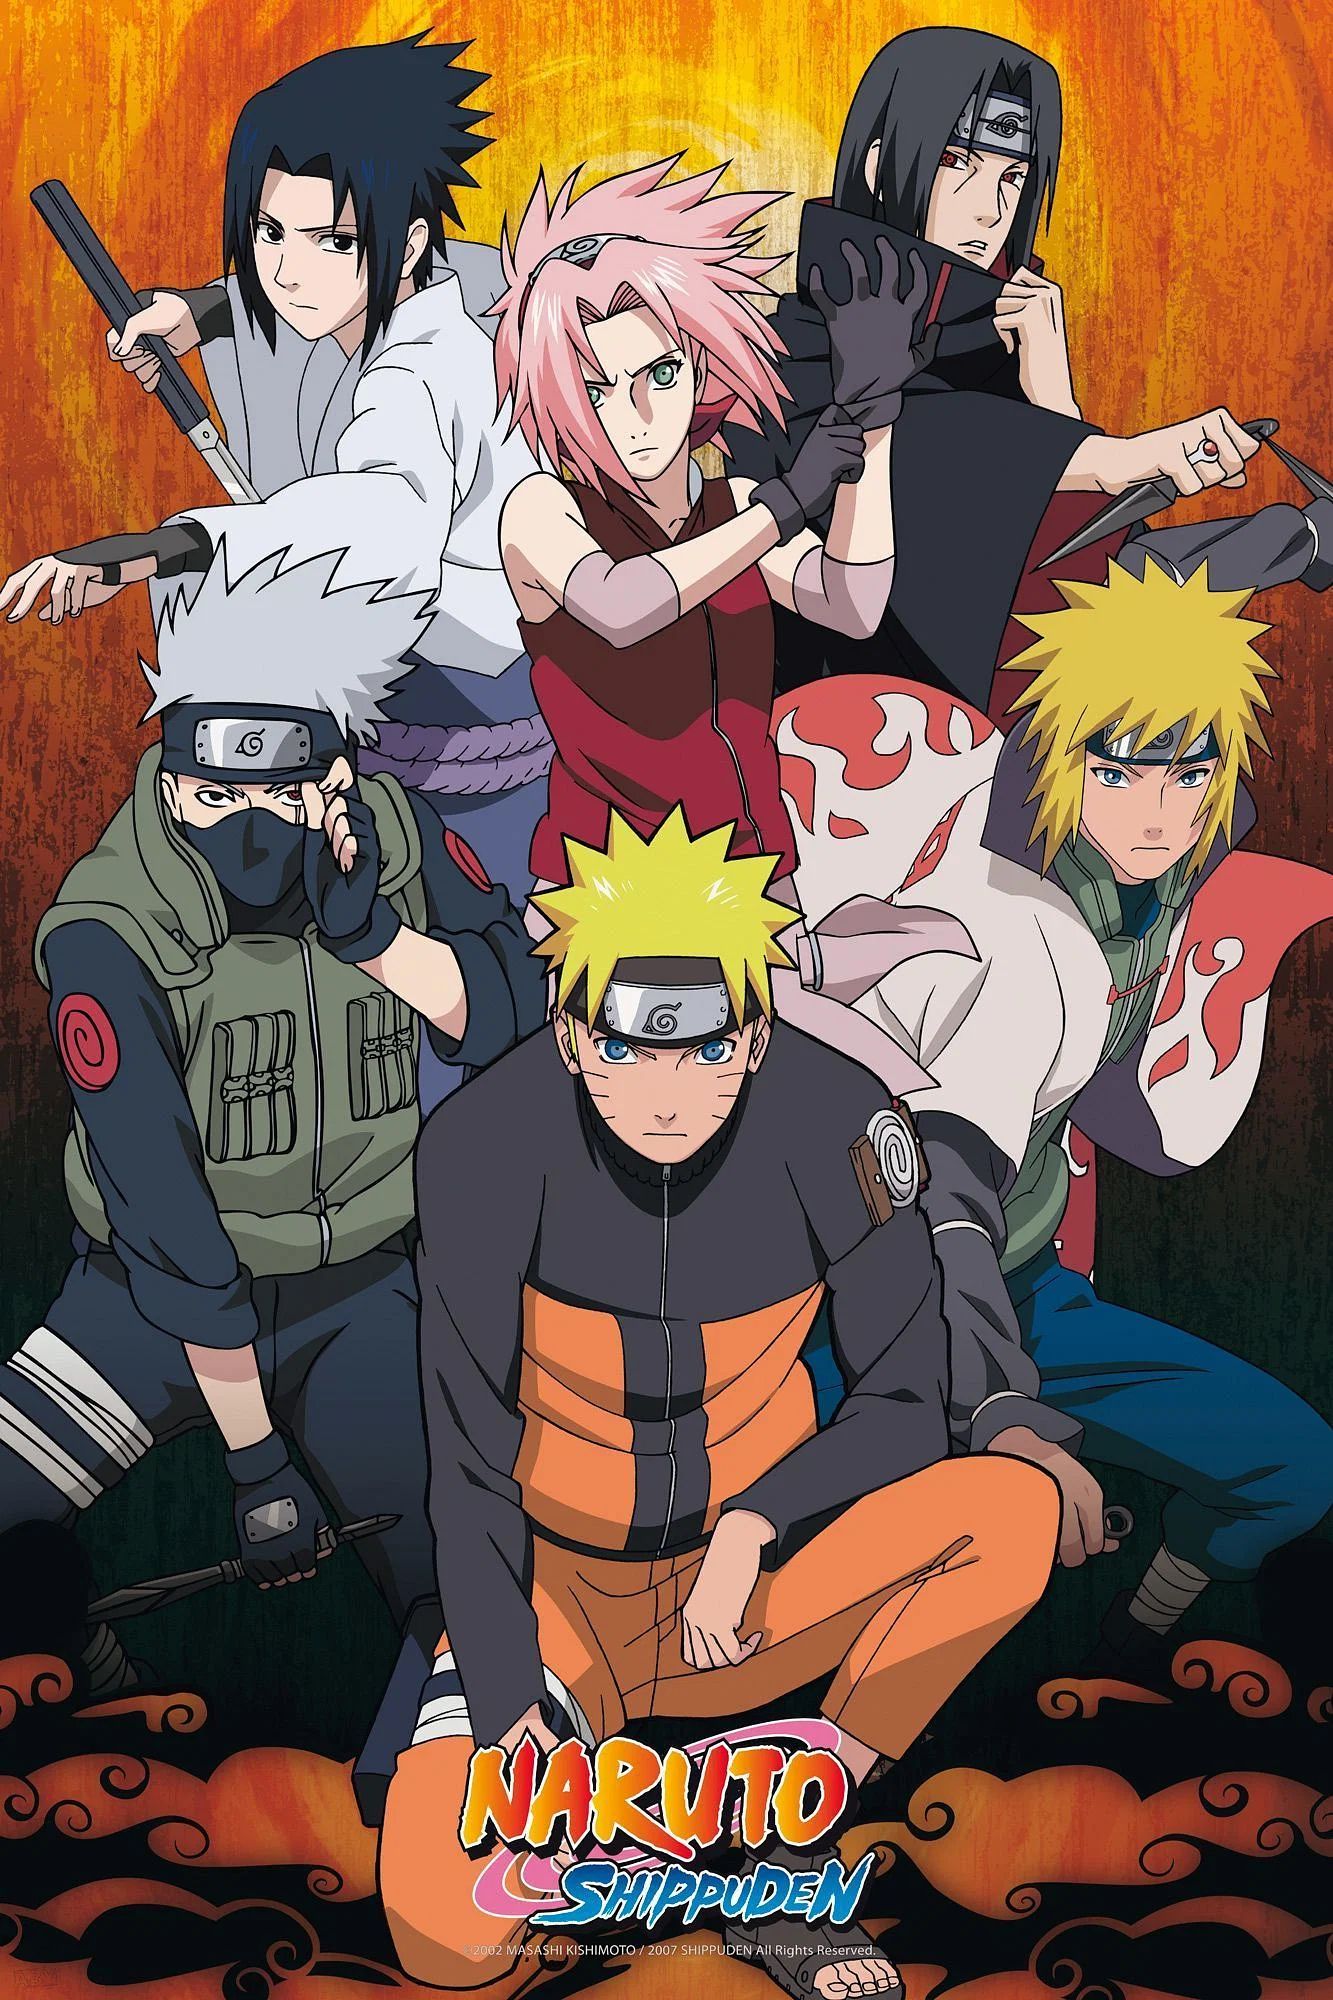 Naruto: Every Member Of The Akatsuki, Ranked Weakest To Strongest